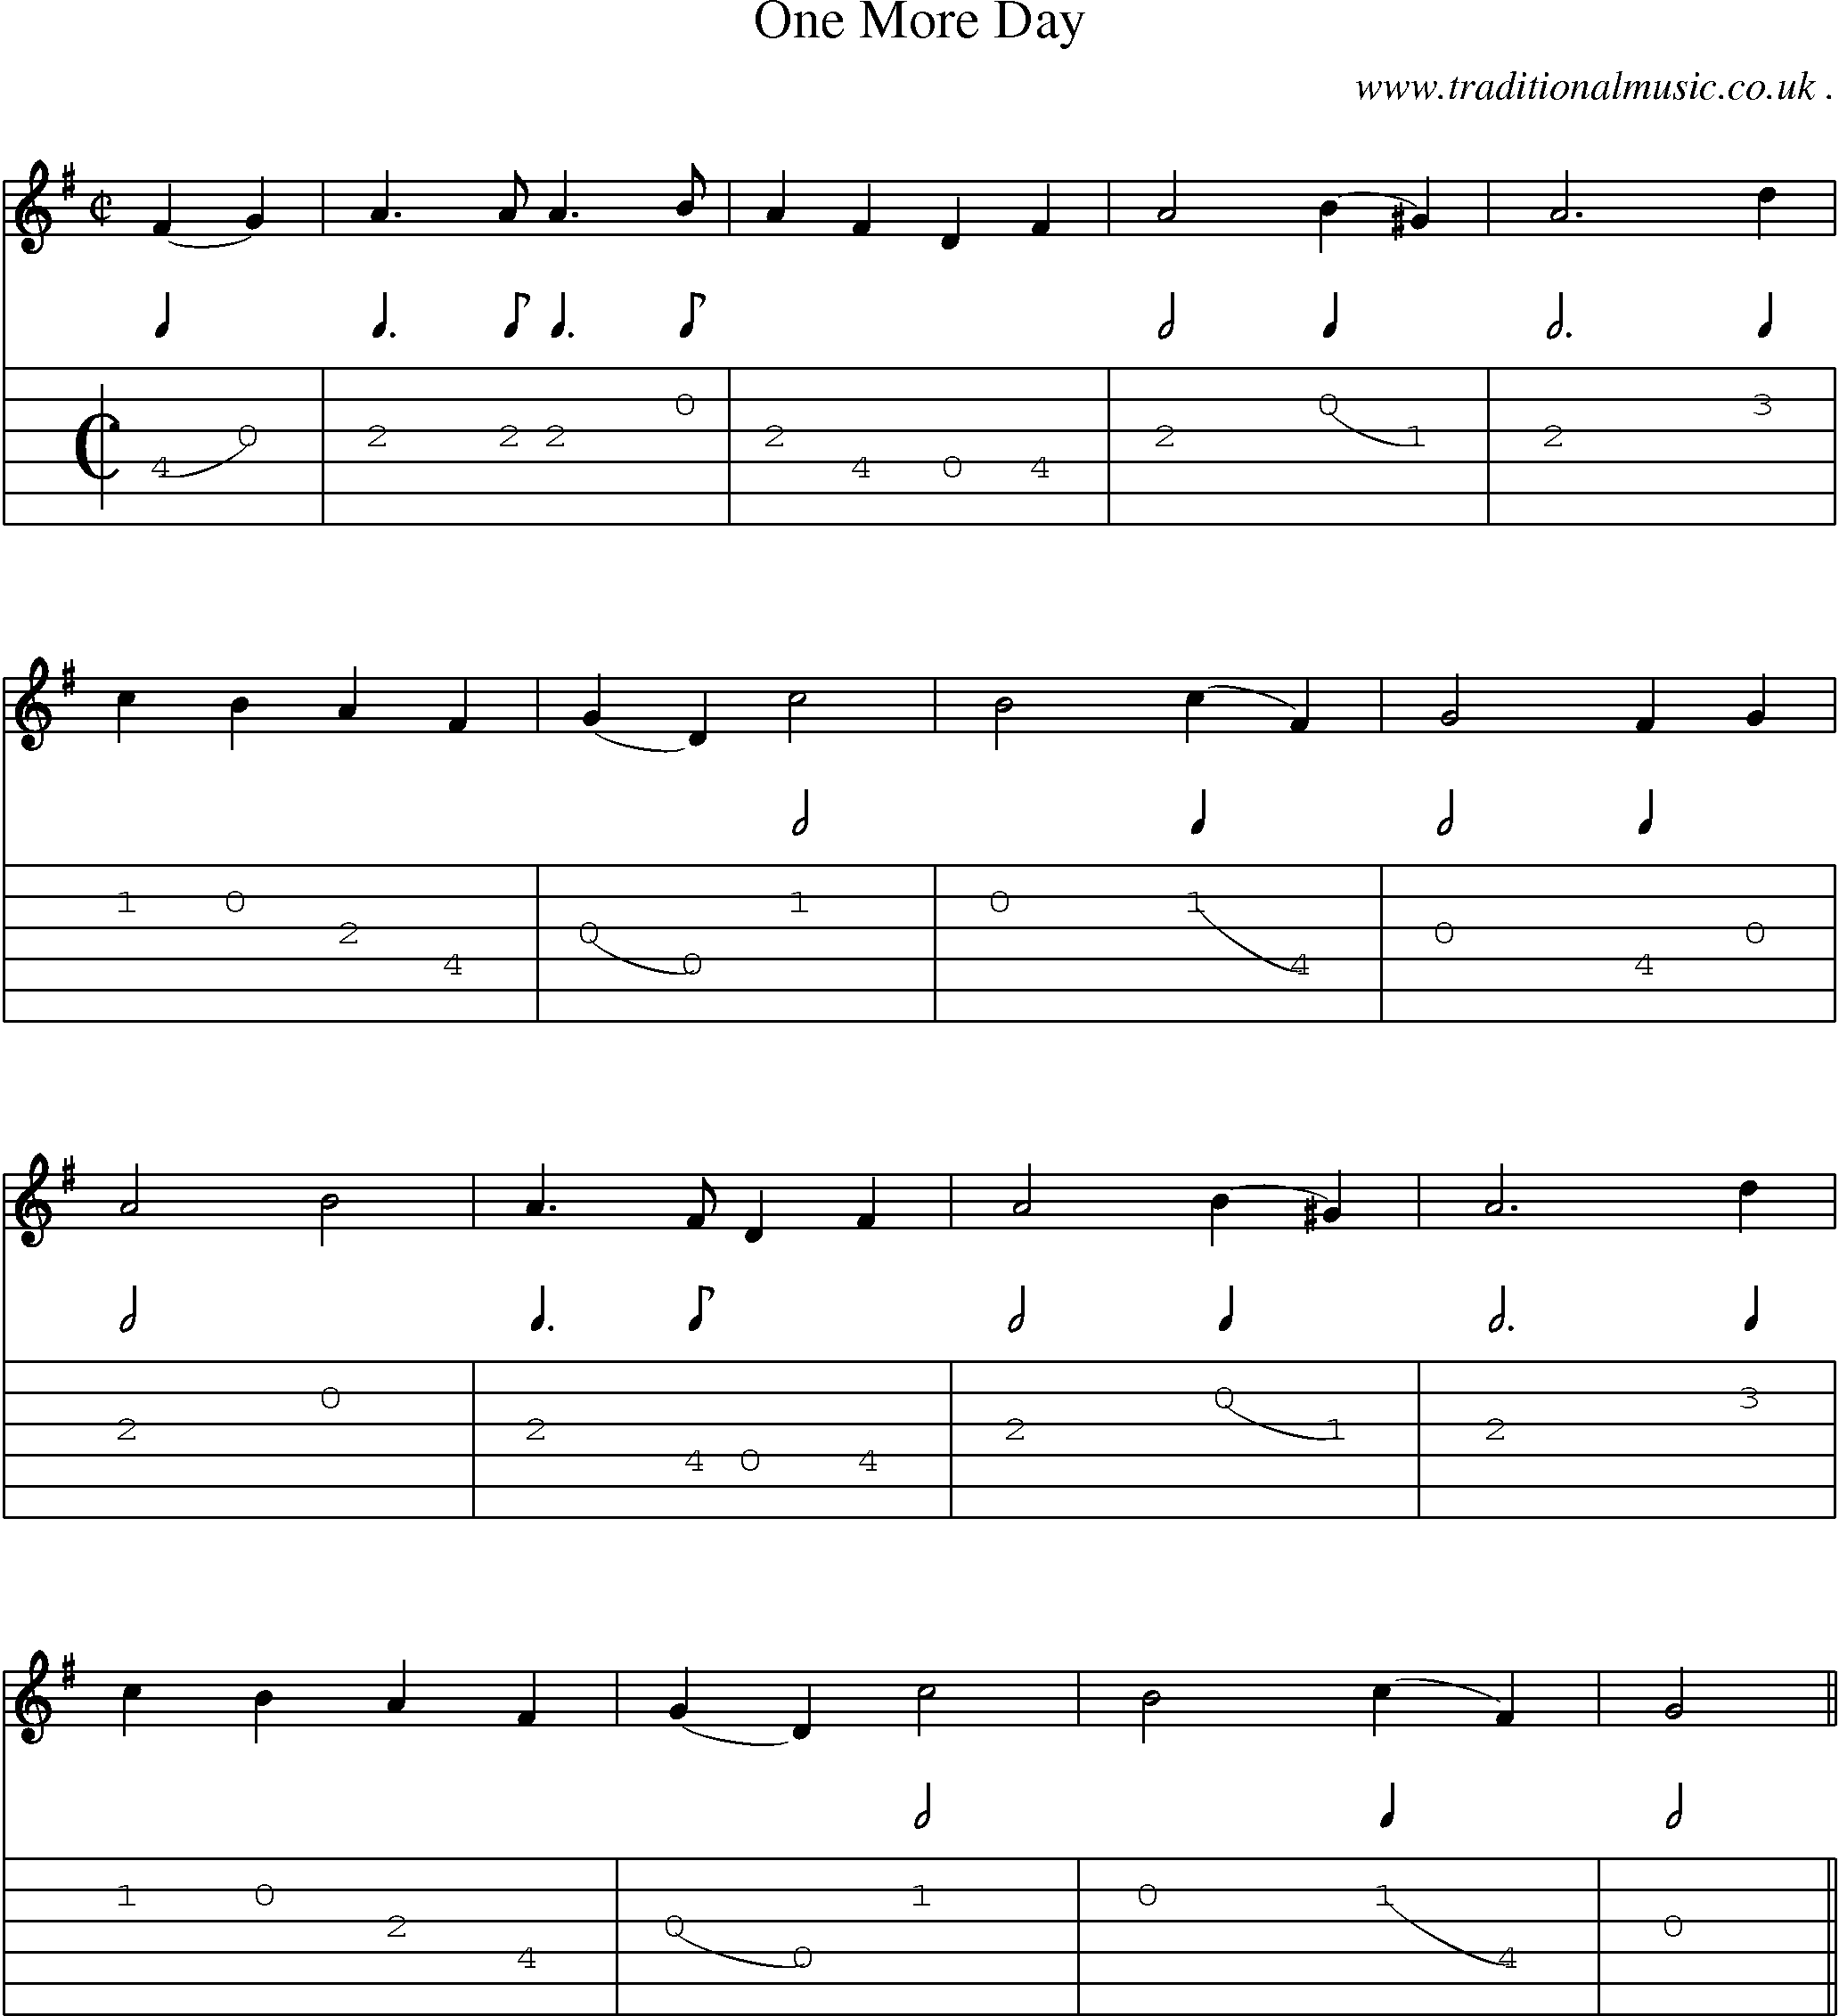 Sheet-Music and Guitar Tabs for One More Day